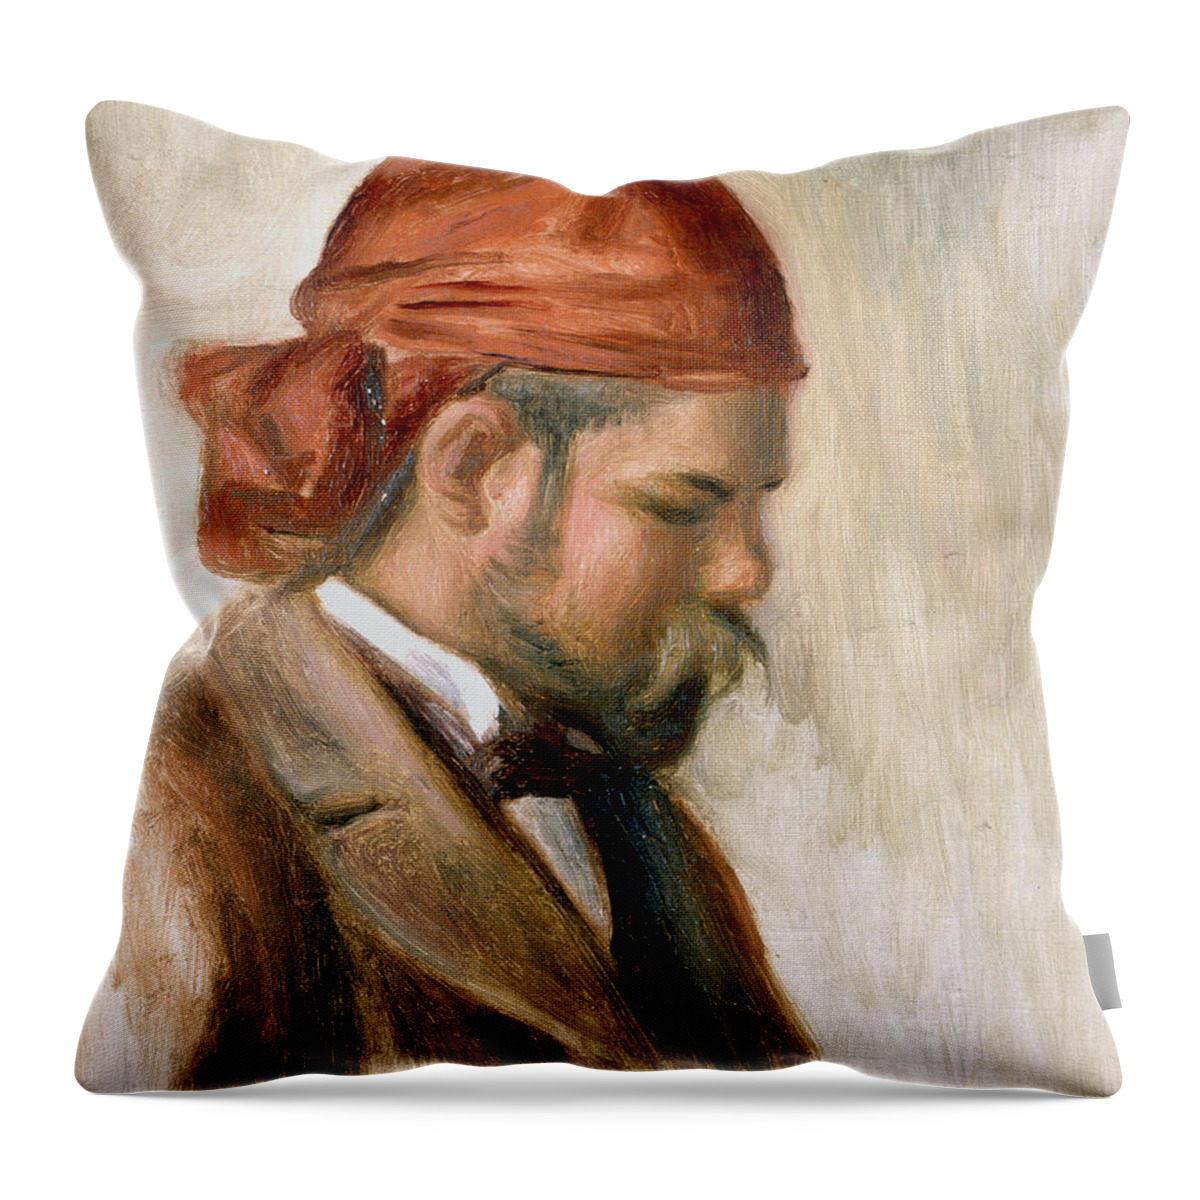 French Art Throw Pillow featuring the painting Vollard with a Red Scarf by Auguste Renoir